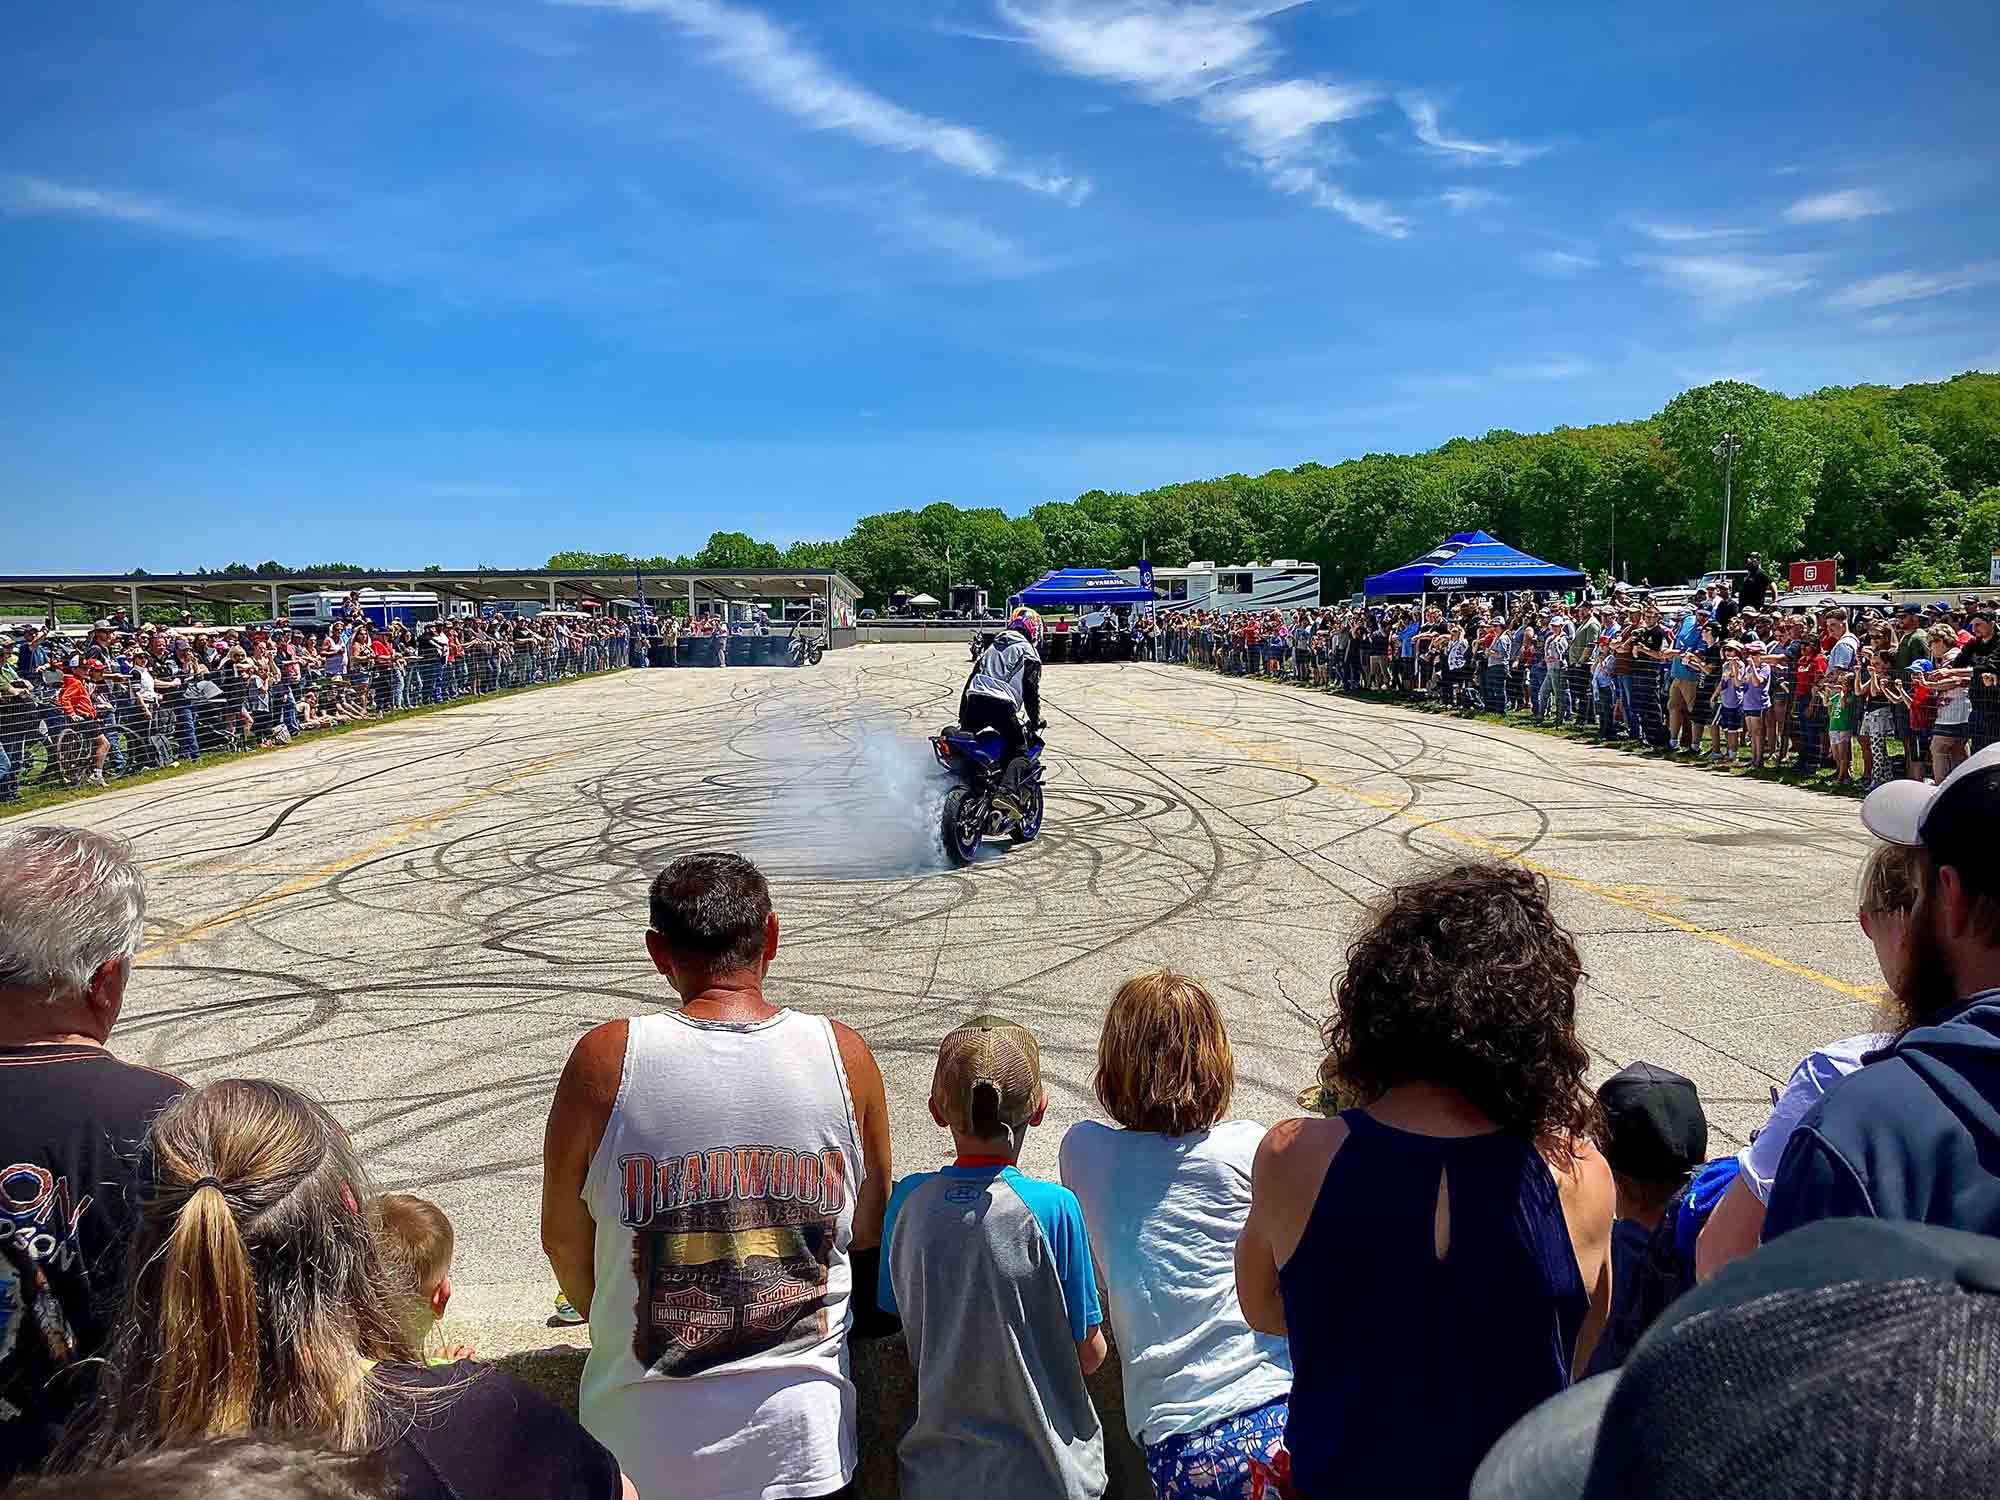 Burnouts and sunburn: Watching the stunt riders put on a show.